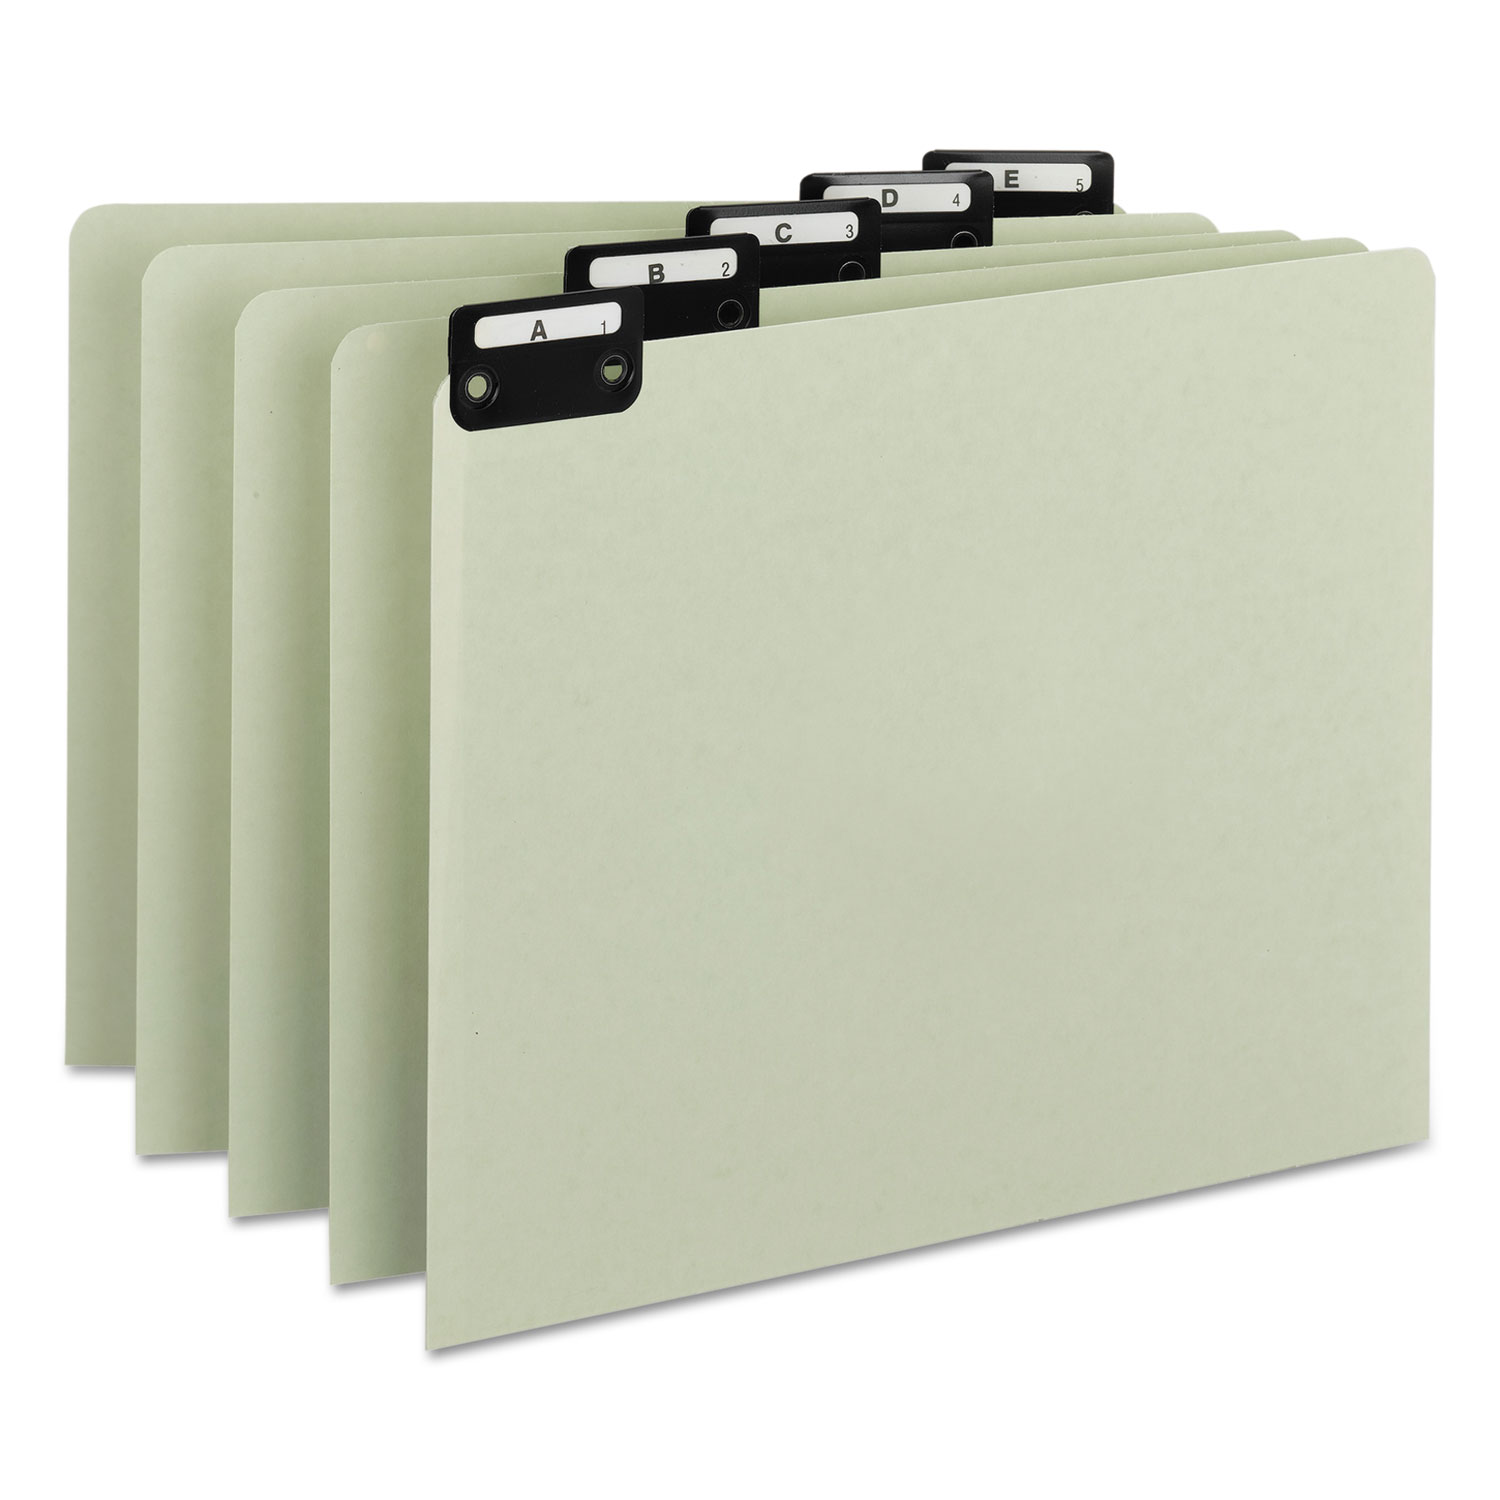  Smead 50576 Alphabetic Top Tab Indexed File Guide Set, 1/5-Cut Top Tab, A to Z, 8.5 x 11, Green, 25/Set (SMD50576) 